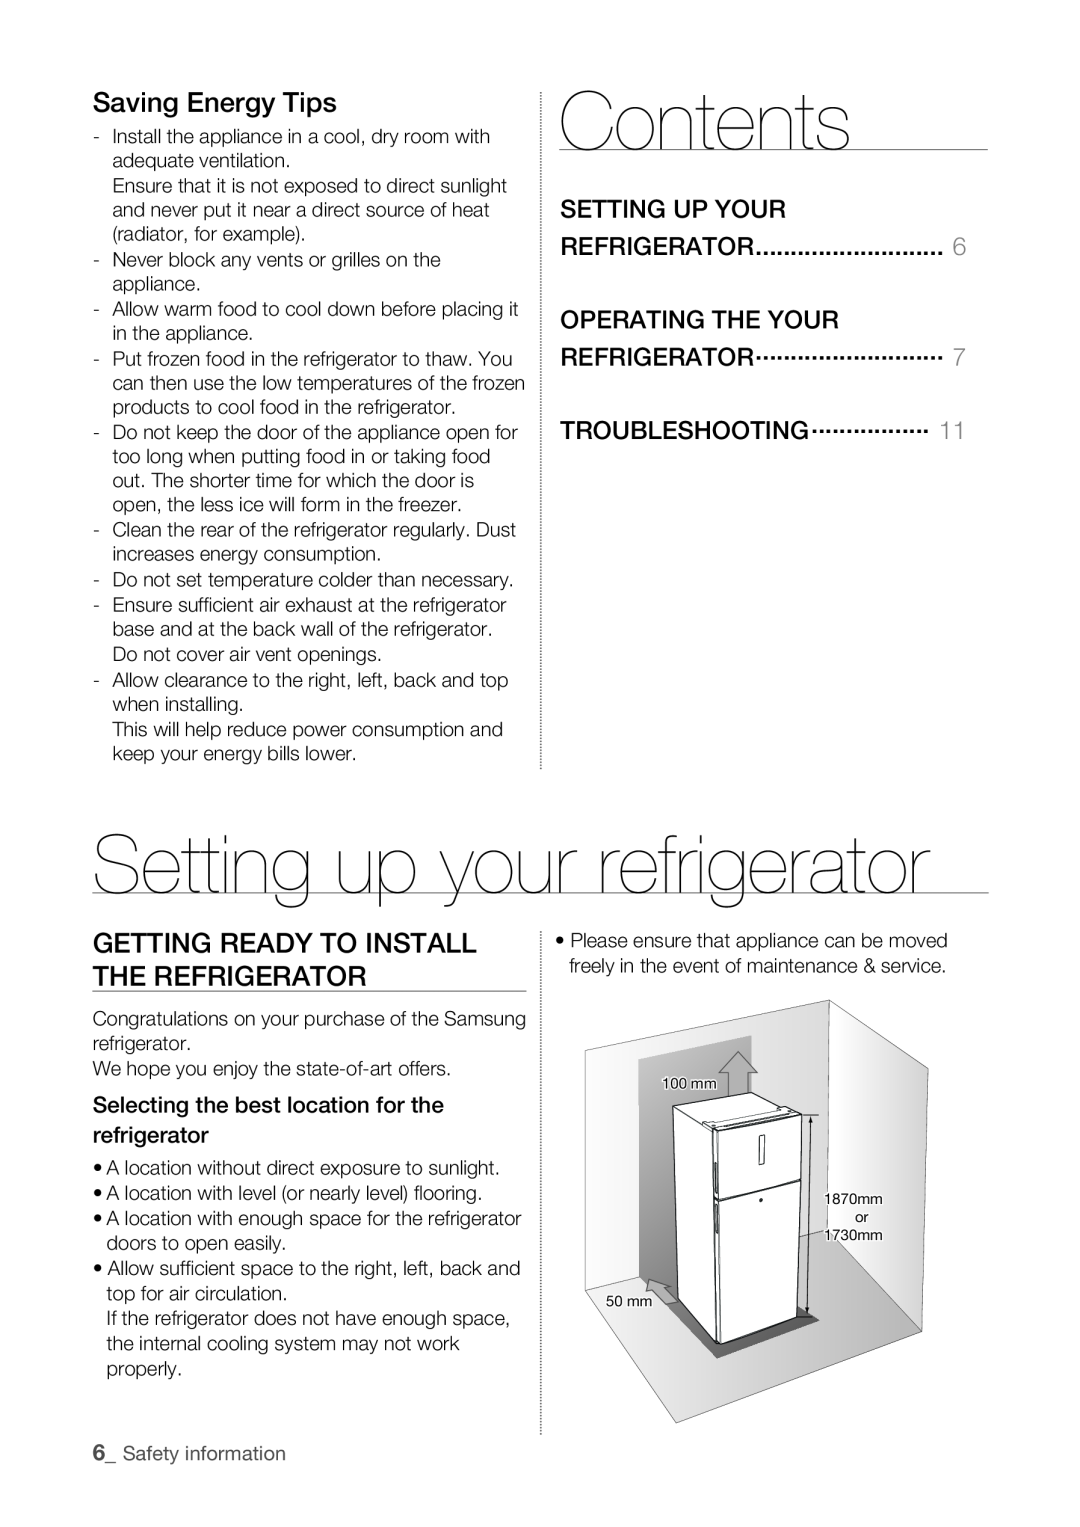 Samsung RT55KZRSL1/XSG Contents, Setting up your refrigerator, Saving Energy Tips, Troubleshooting, Safety information 